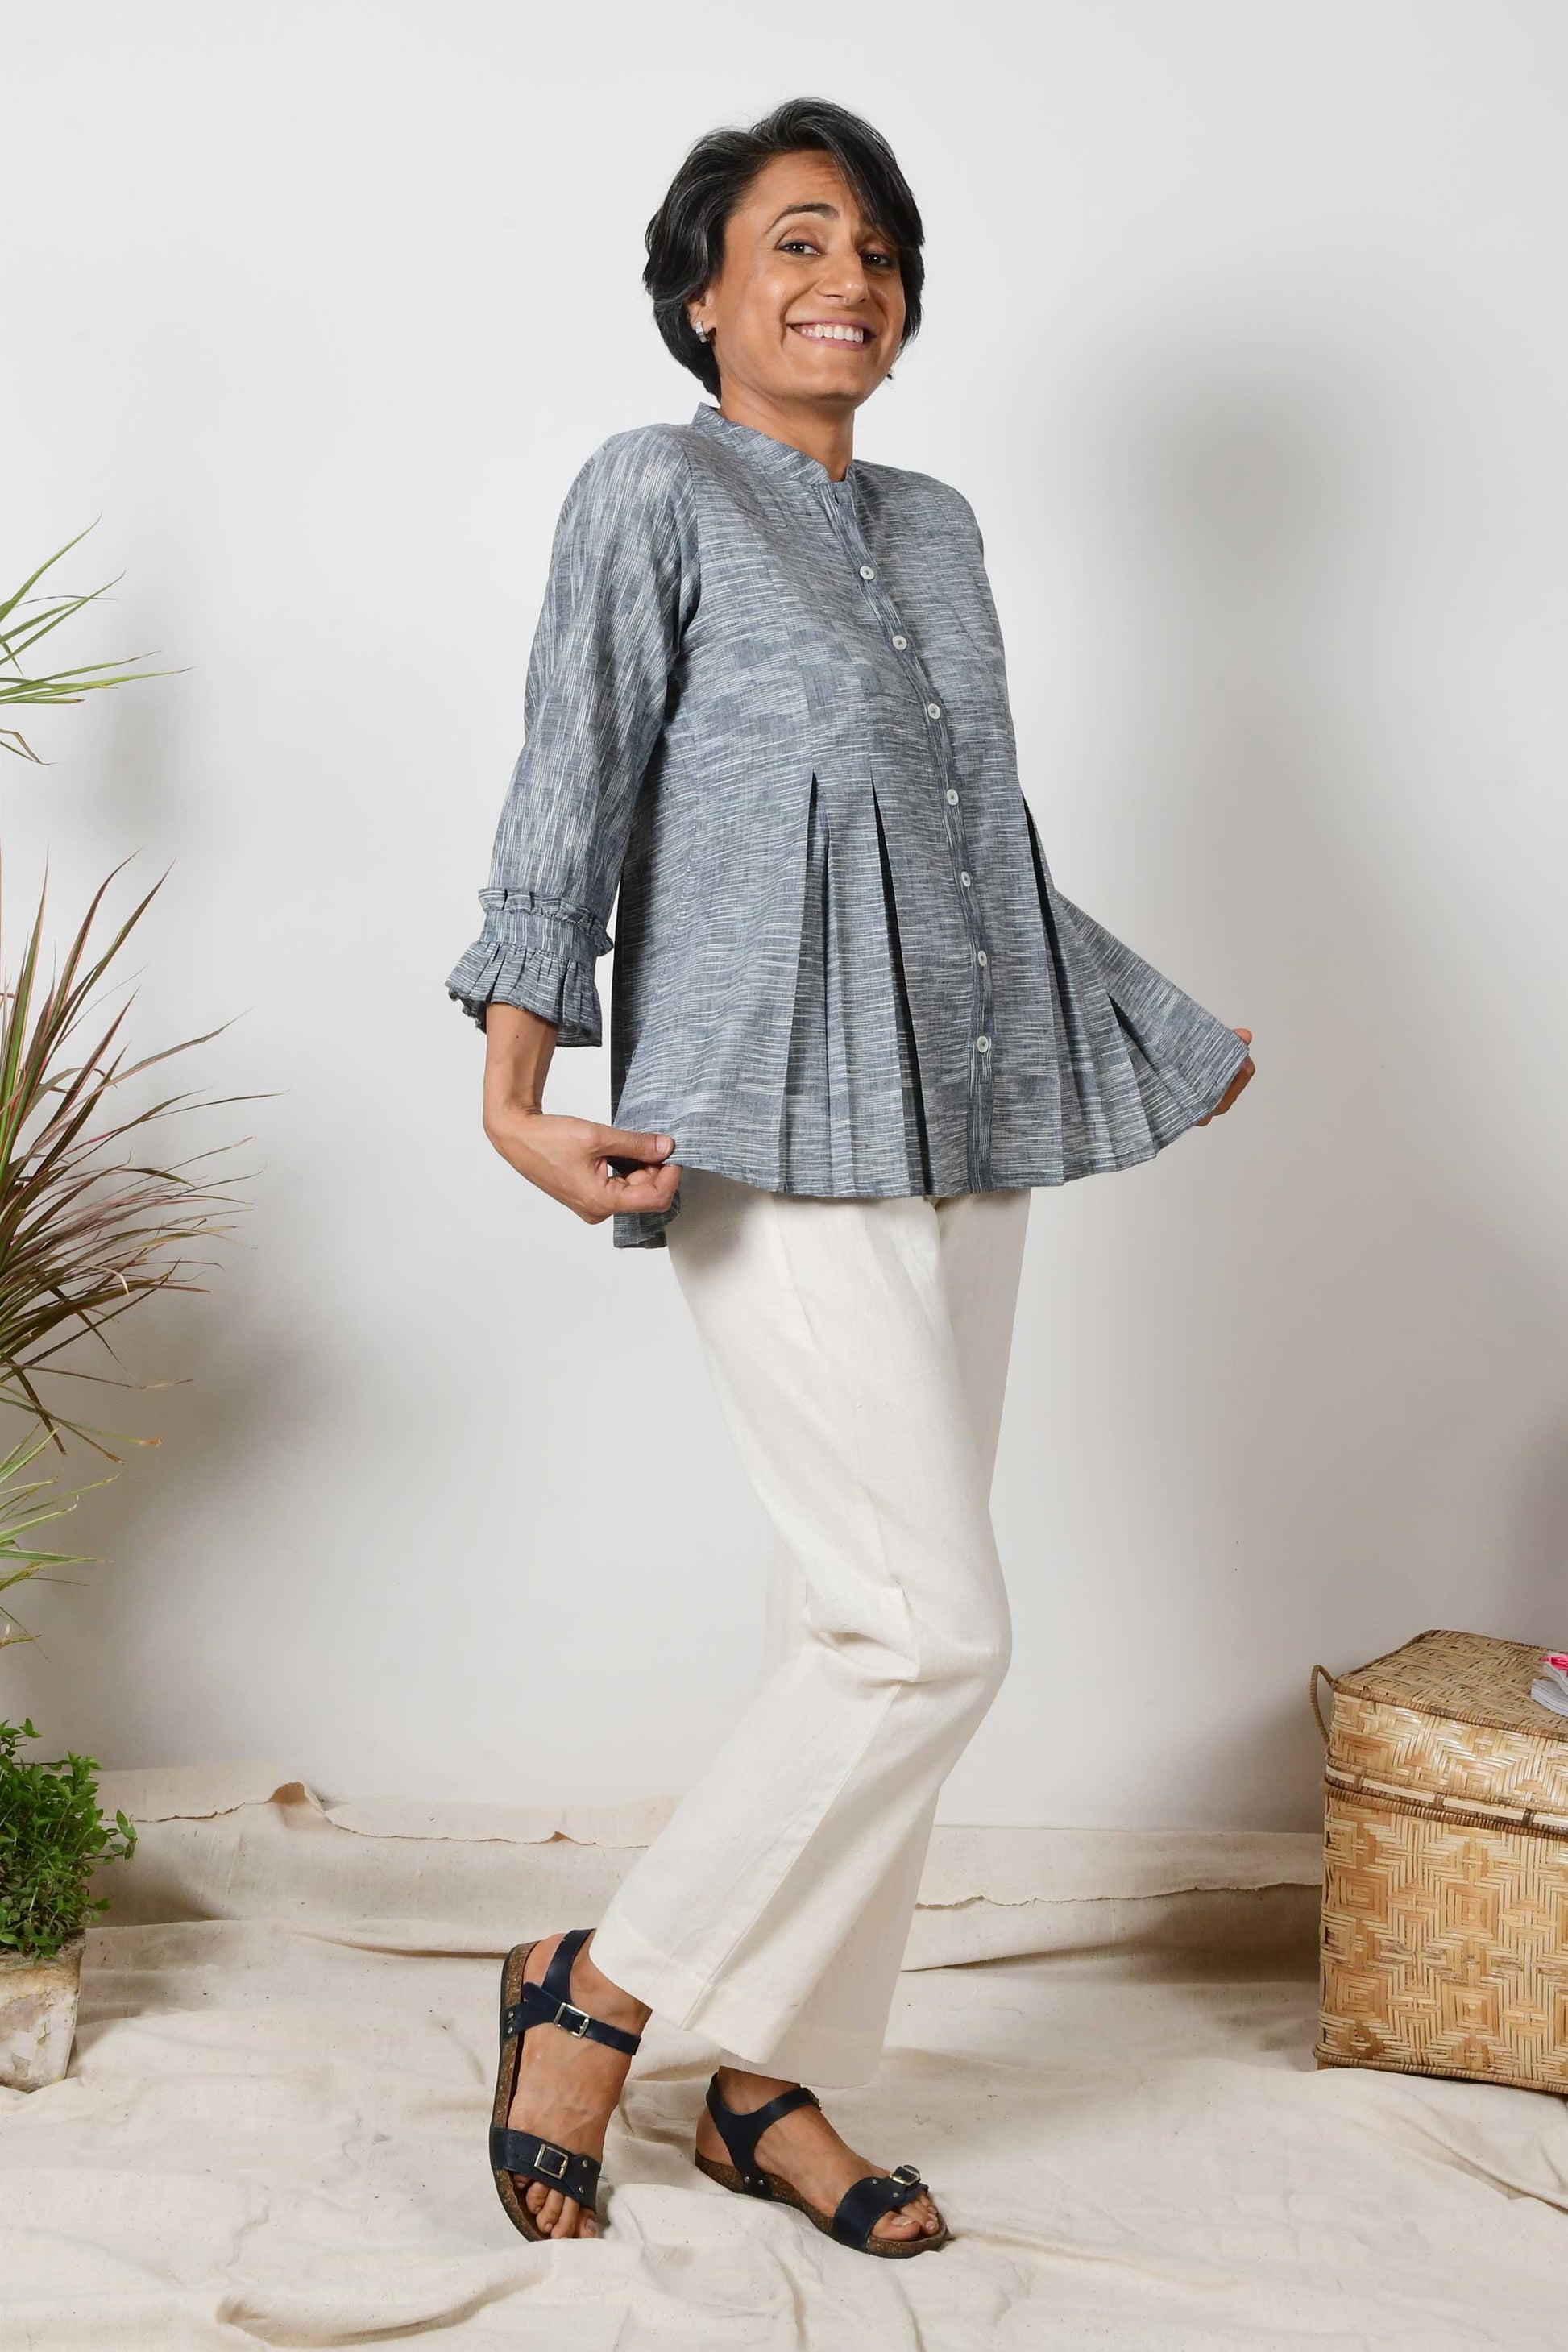 Smiling woman with beautiful short grey hair wearing offwhite cotton pants and black cotton shirt blouse with texture on the fabric and box pleats on the top.